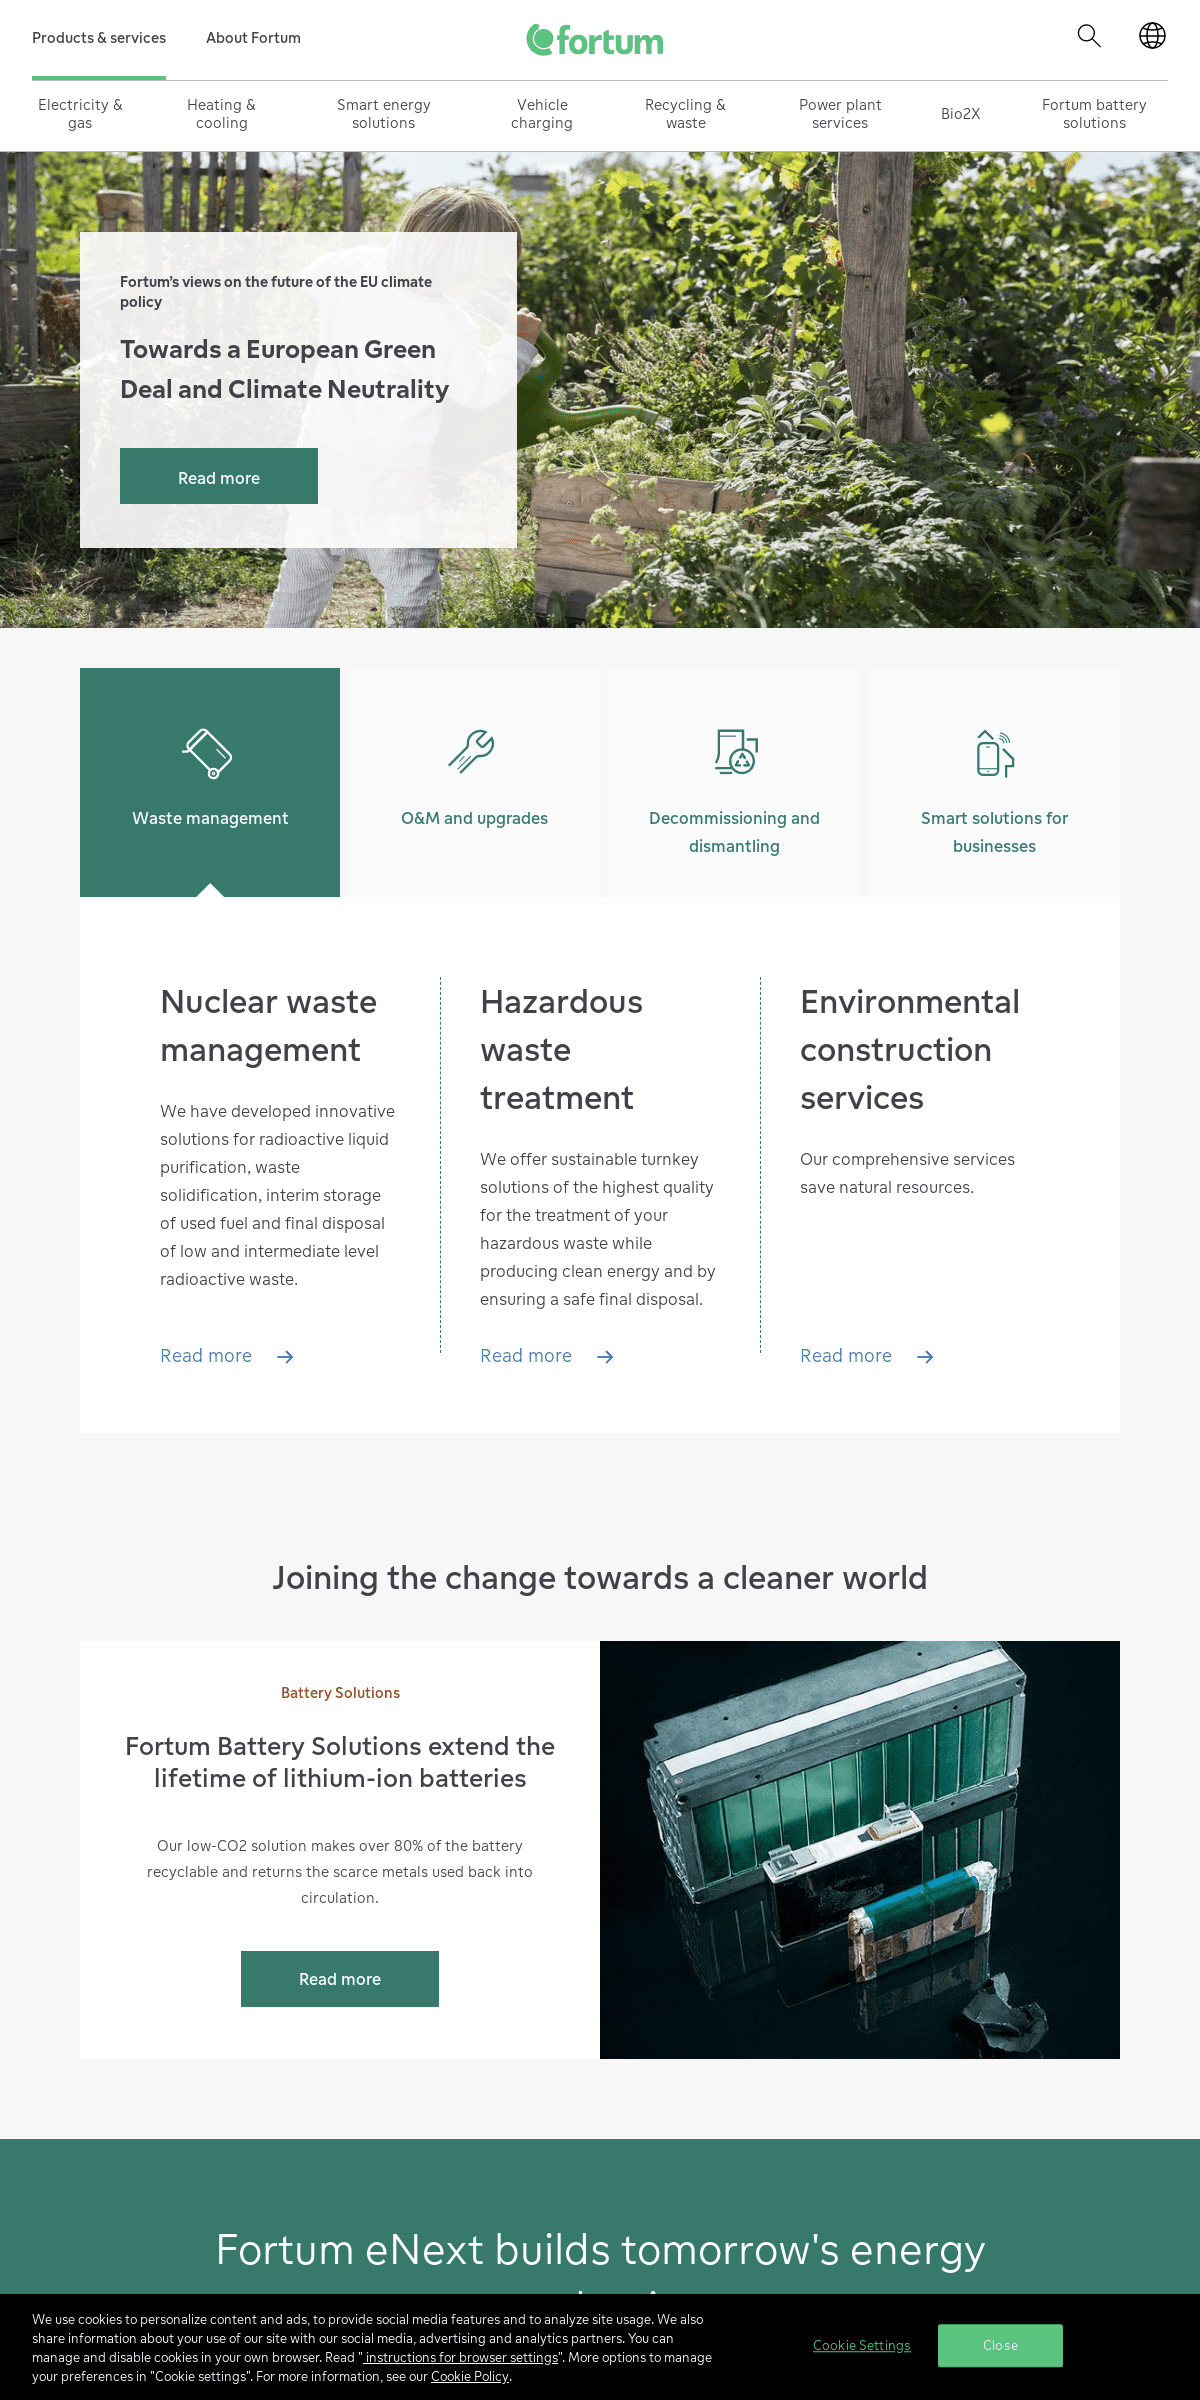 A complete backup of fortum.com